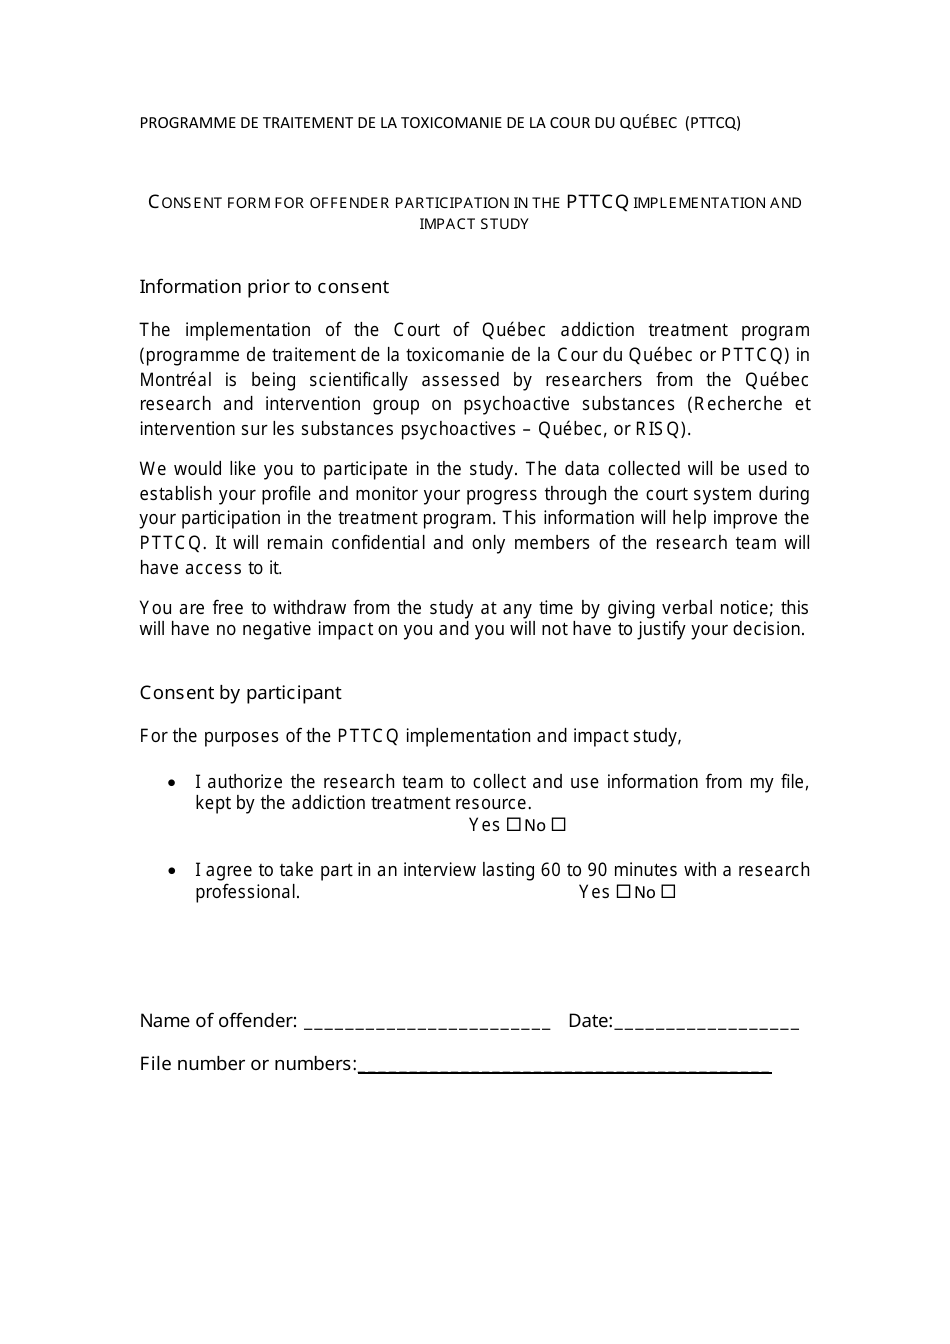 Consent Form for Offender Participation in the Pttcq Implementation and Impact Study - Quebec, Canada, Page 1